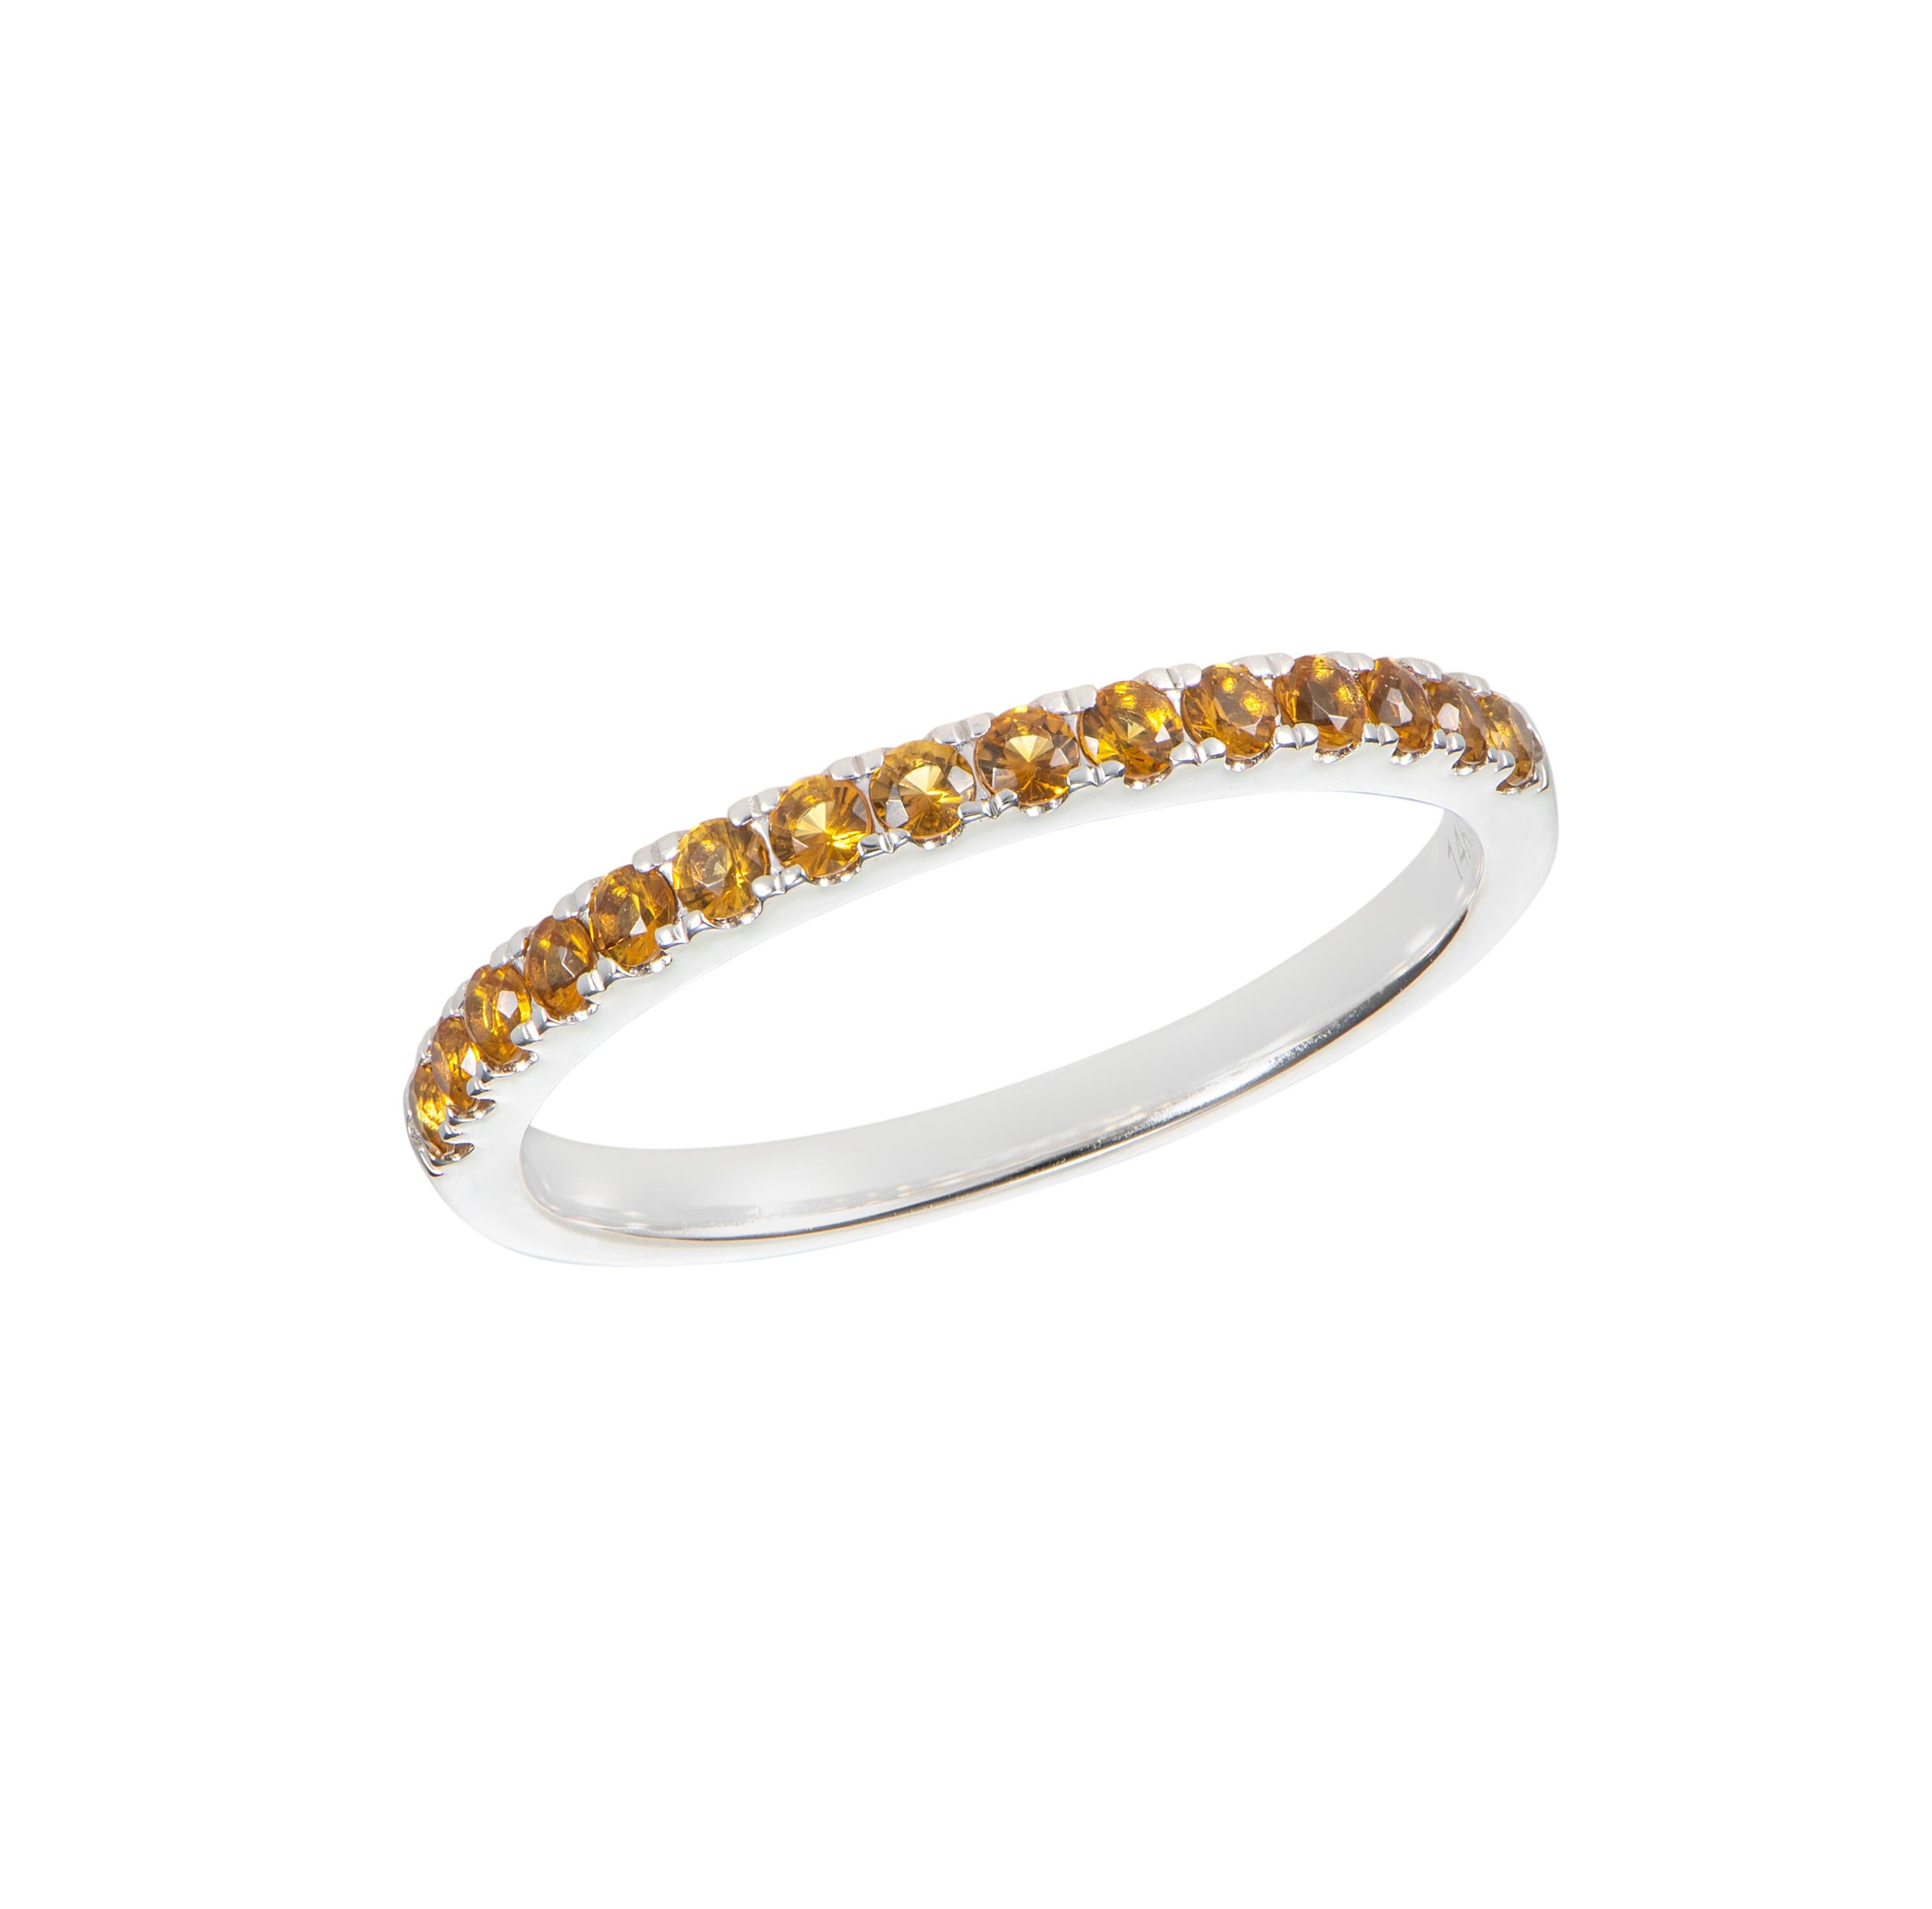 Contemporary 0.27 Carat Citrine Eternity Ring in 14Karat White Gold. For Sale